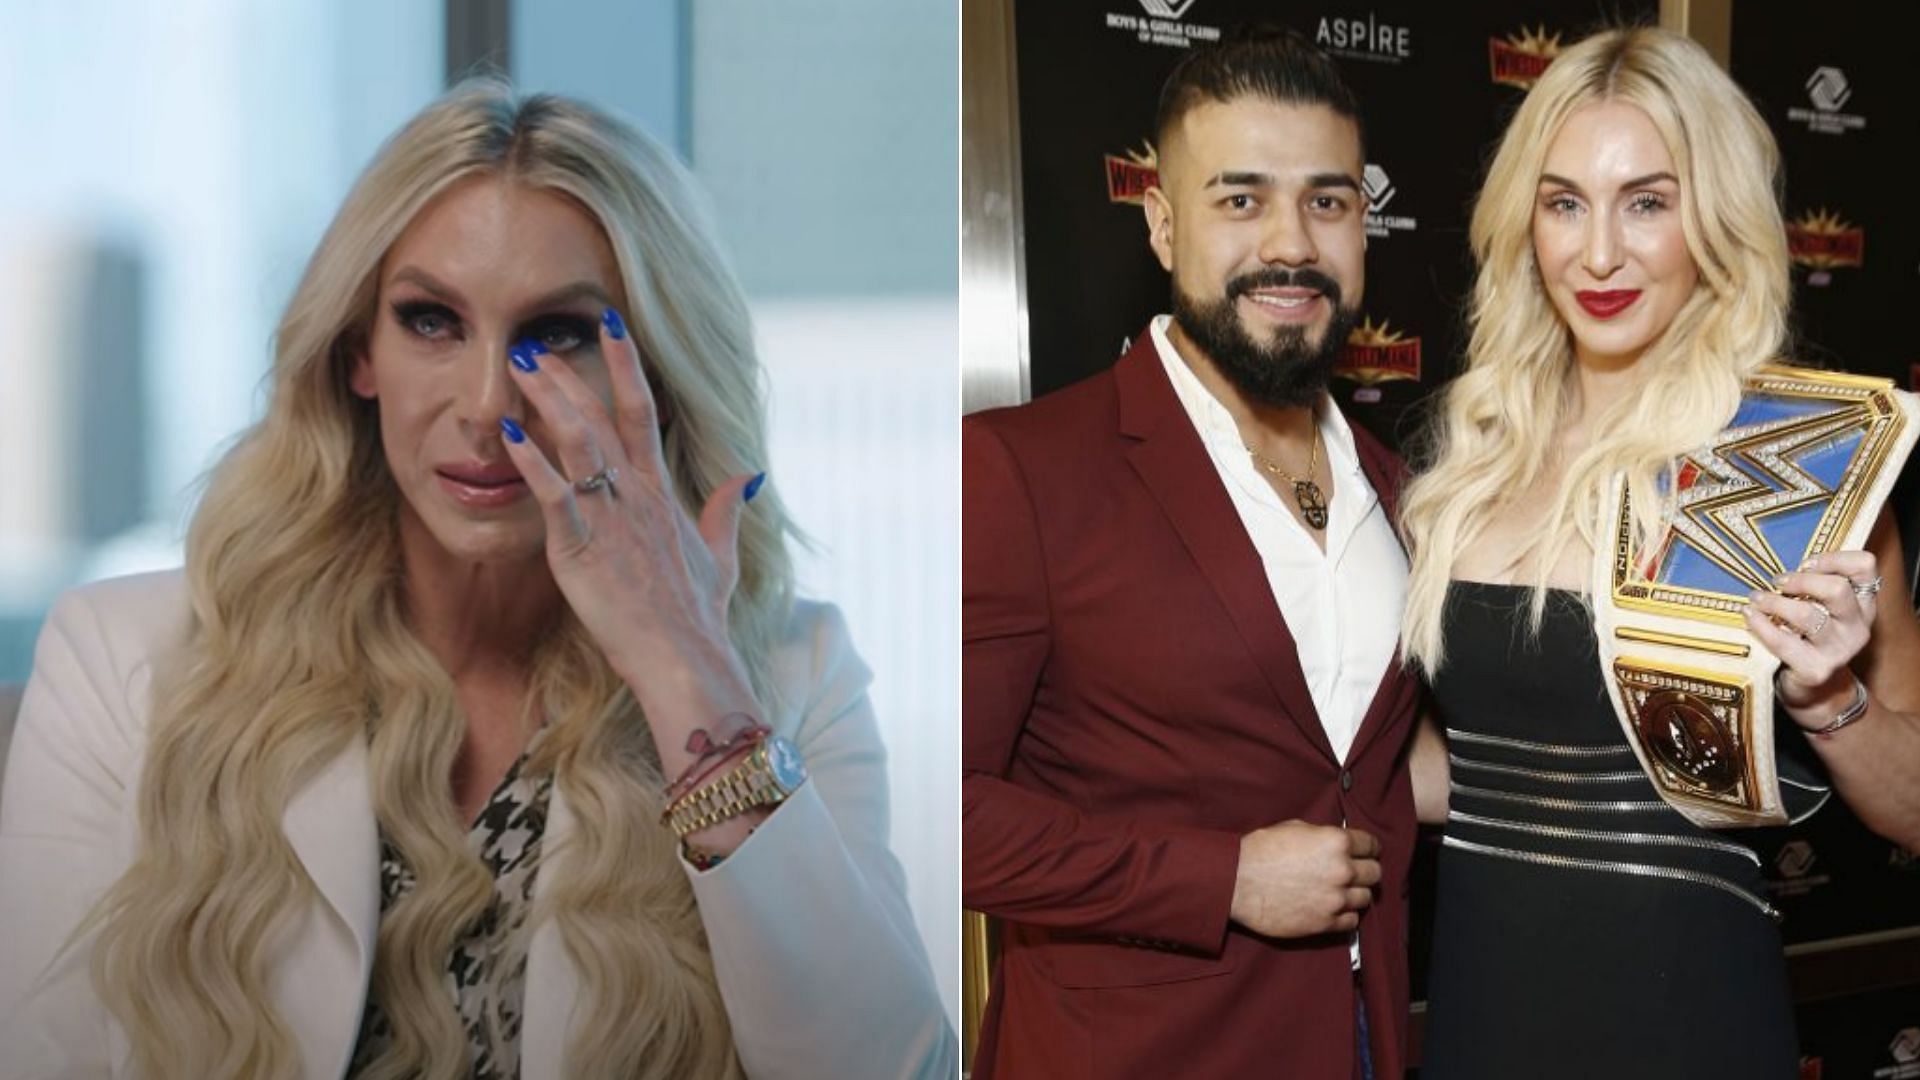 Charlotte Flair and Andrade are set to get married later this year